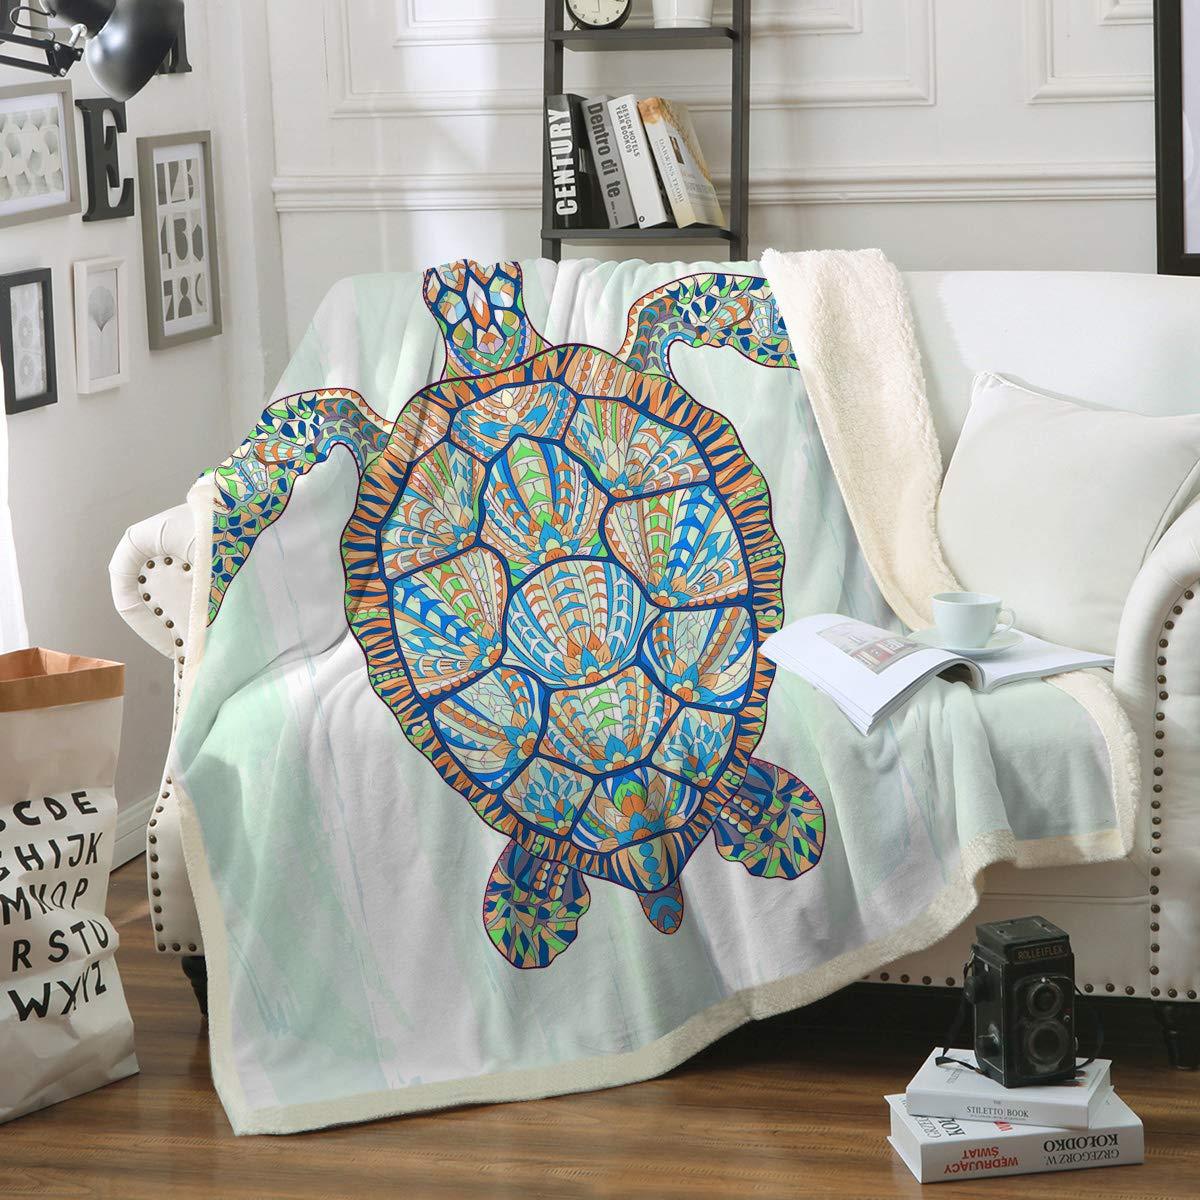 Sea Turtles Couch Cover Sofa Slipcover Blue Coral Beach Ocean Theme  Armchair Loveseat Oversize Sofa Furniture Protector 